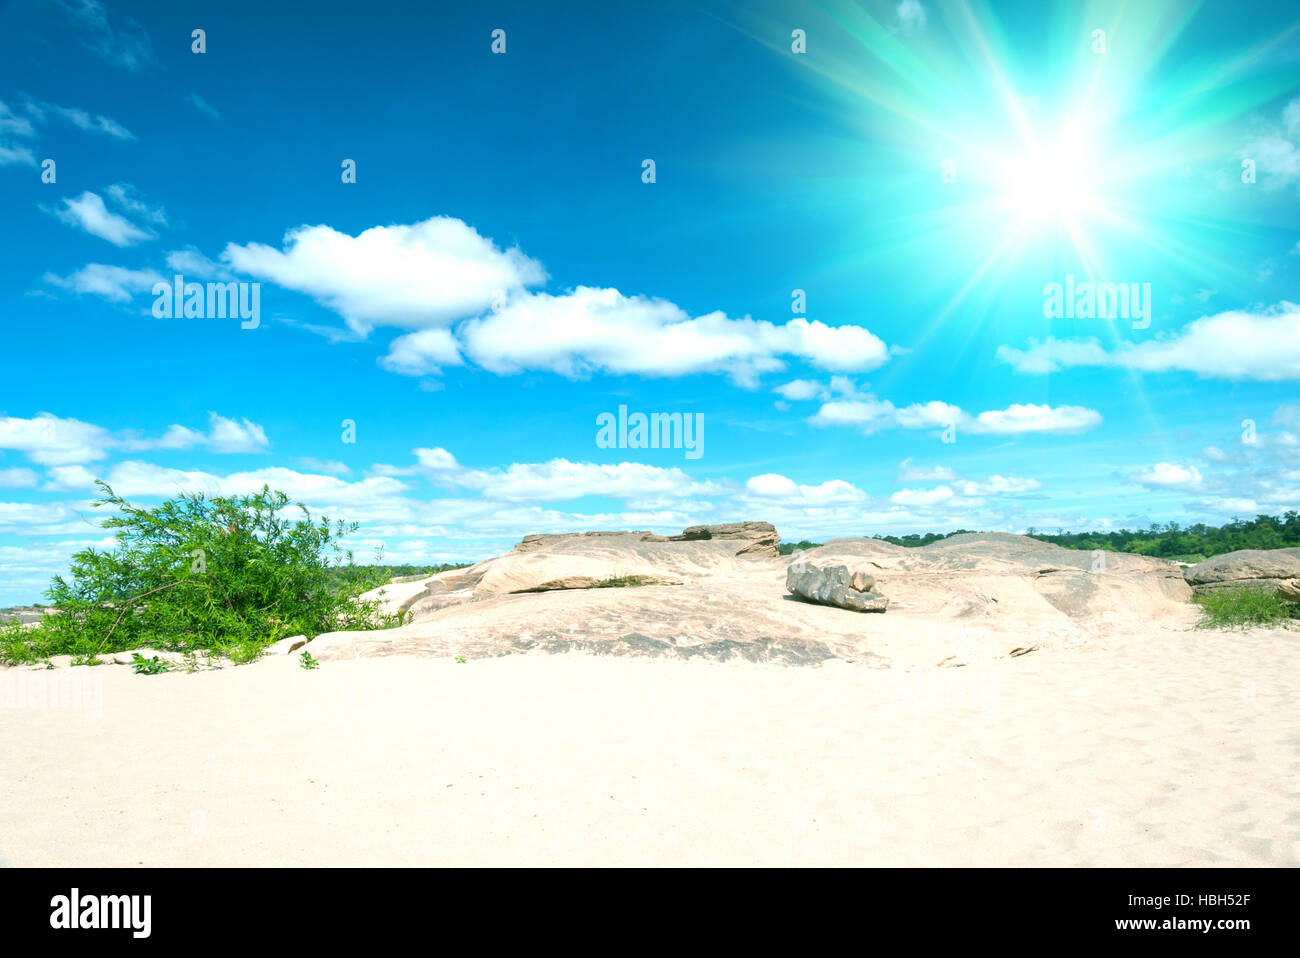 Abstract background of blue sky and clouds Stock Photo